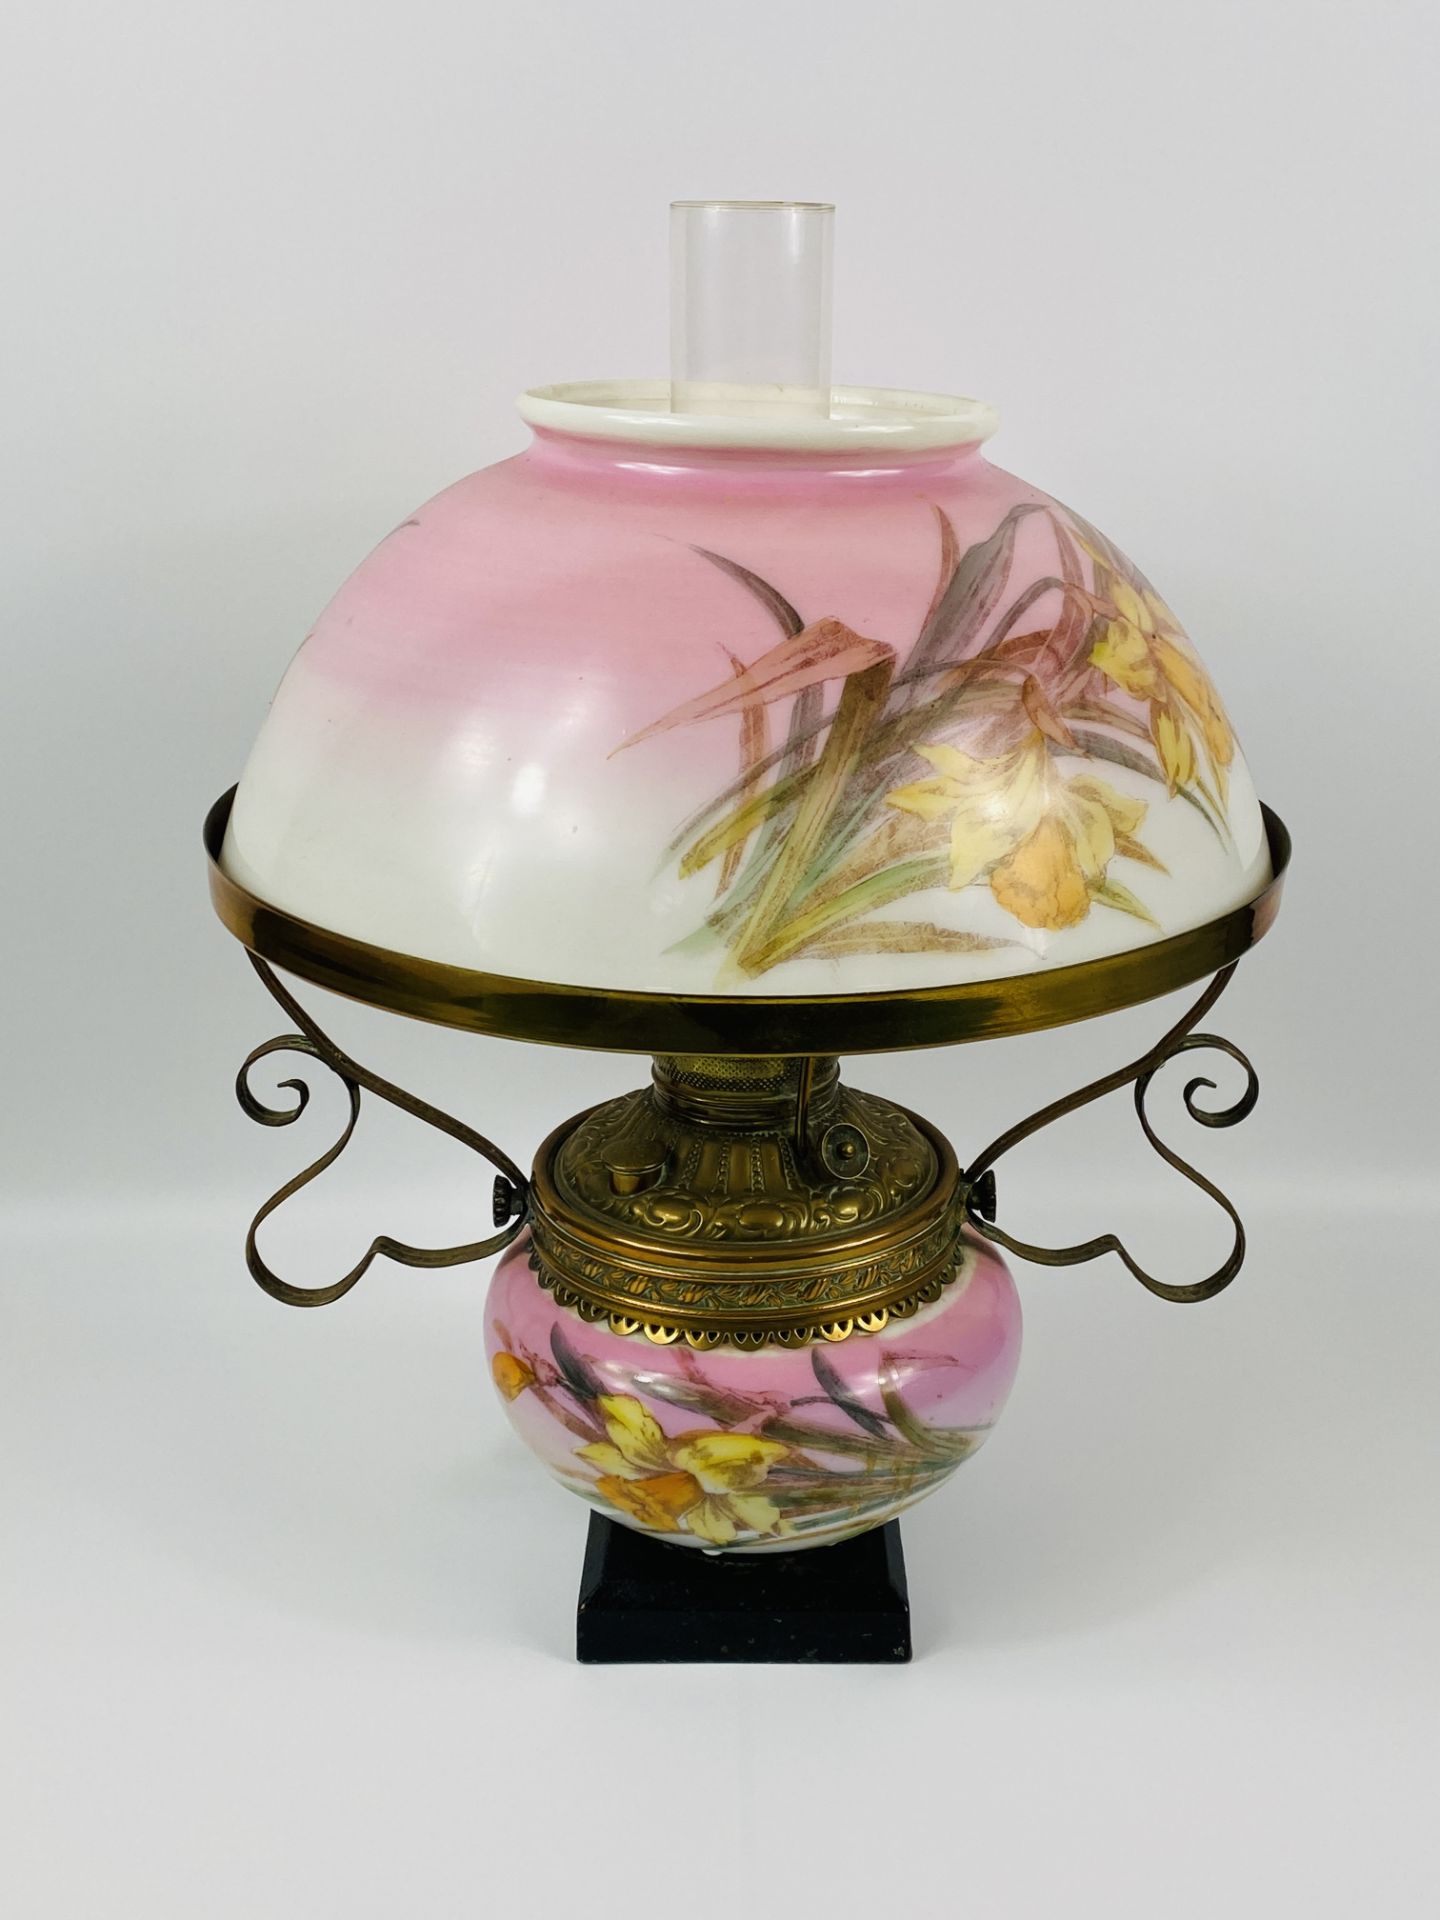 Victorian oil lamp later wired as a table lamp - Image 2 of 6